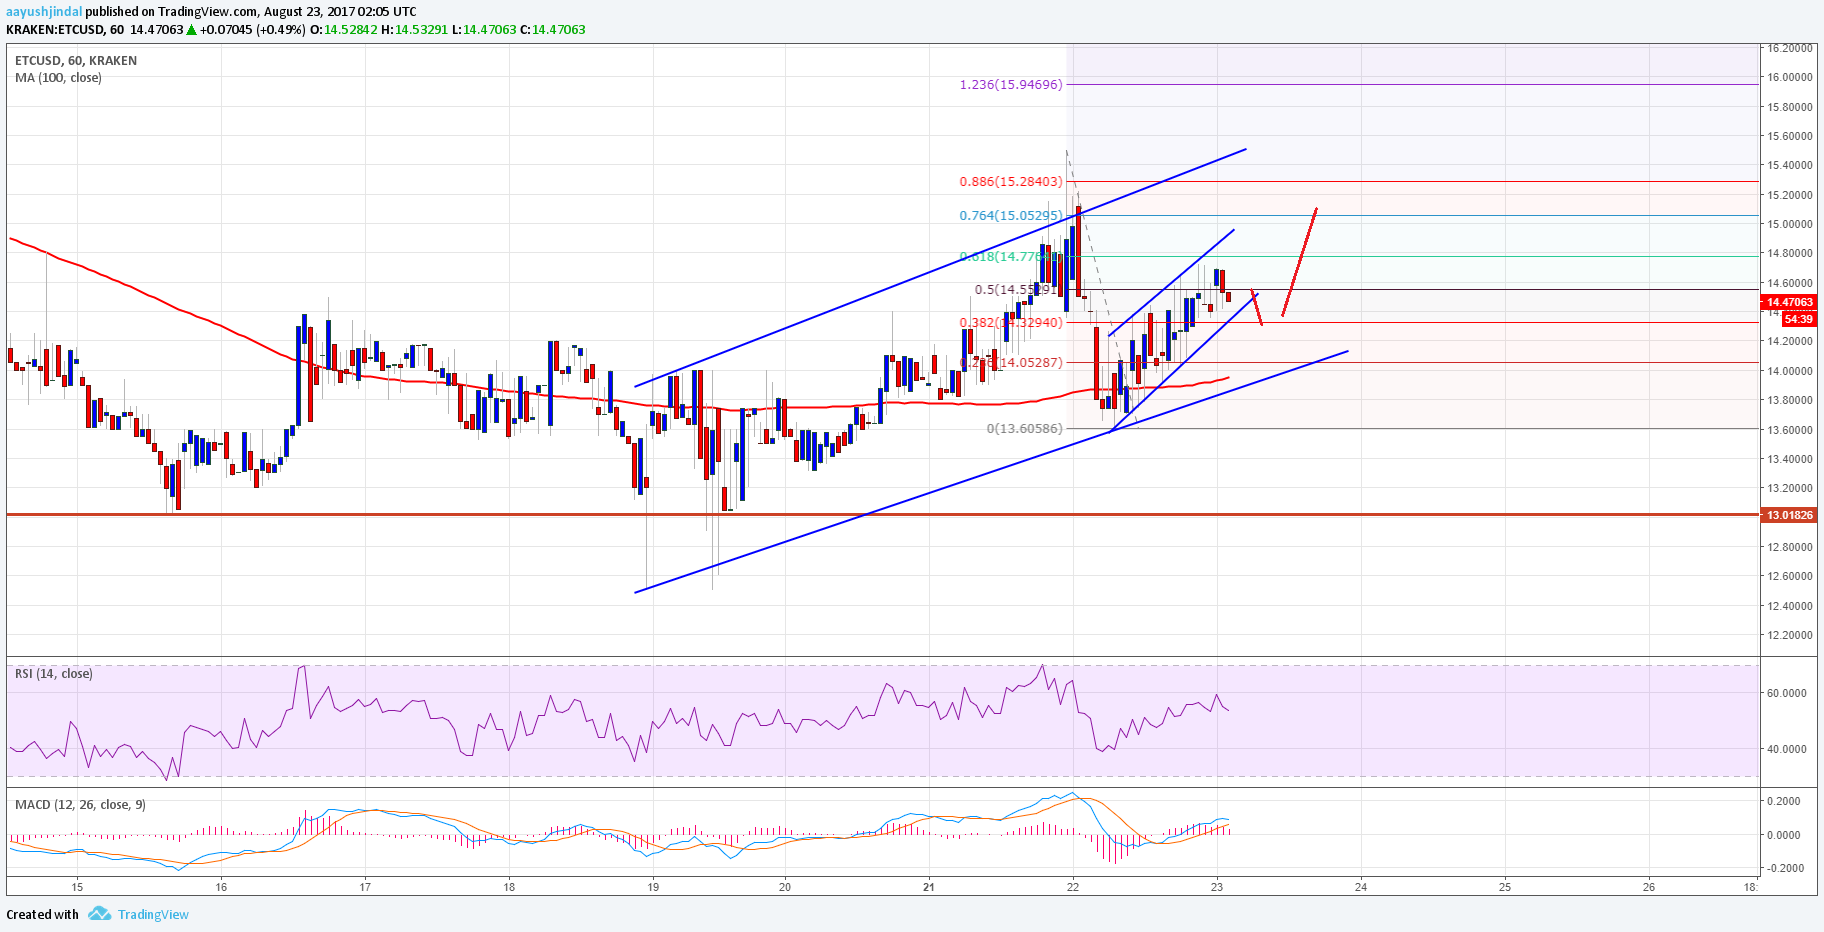 Ethereum Classic Price Tech Analysis – ETC/USD Remains Support